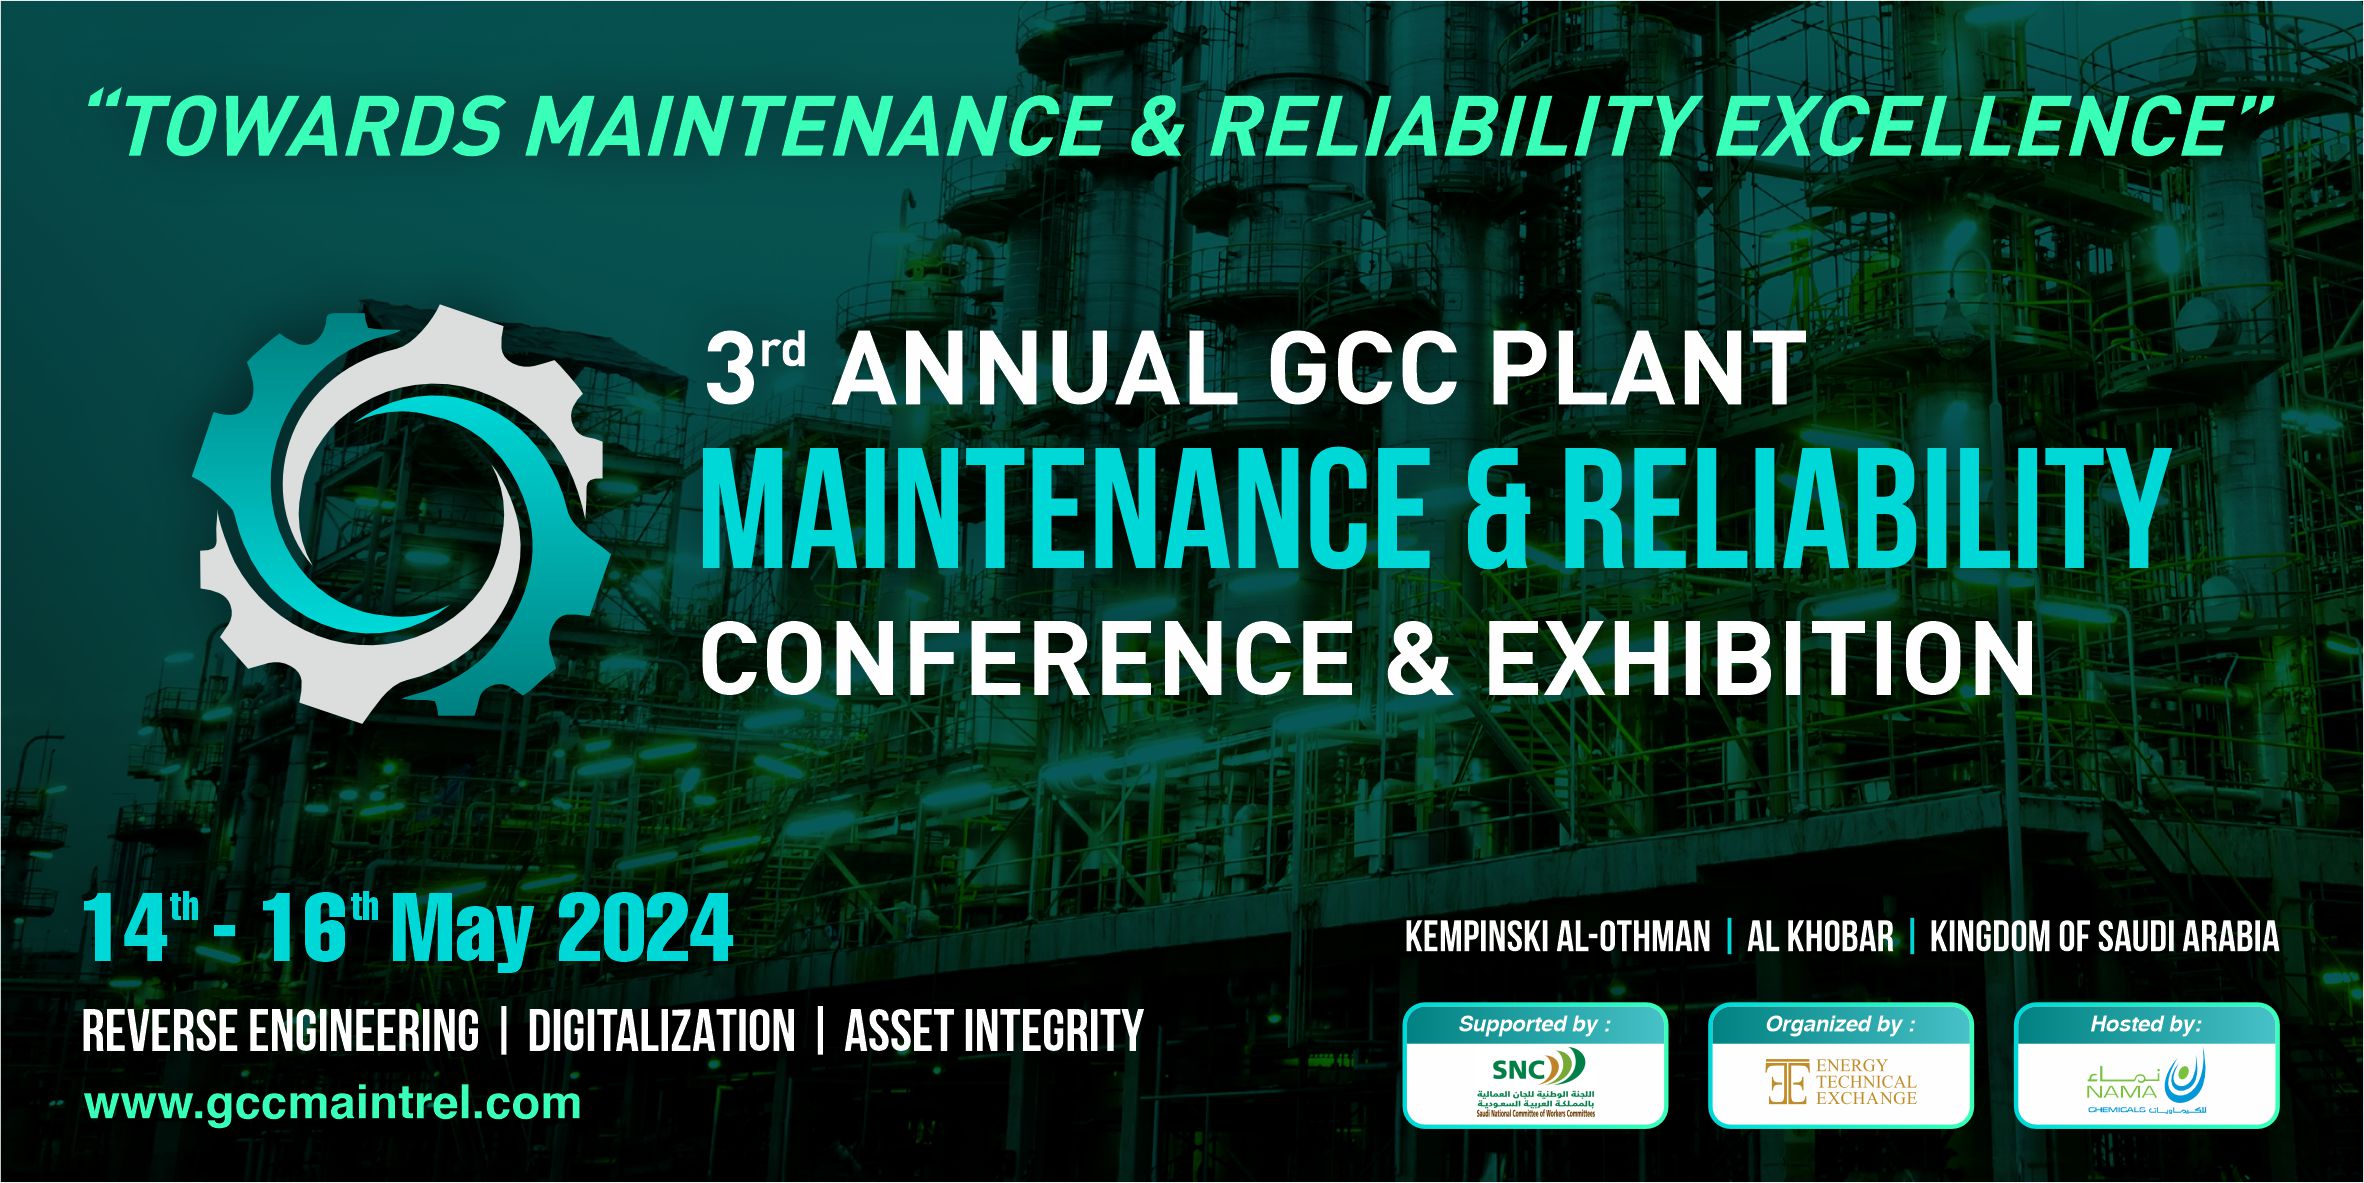 The 3rd Annual GCC Plant Maintenance and Reliability Conference & Exhibition